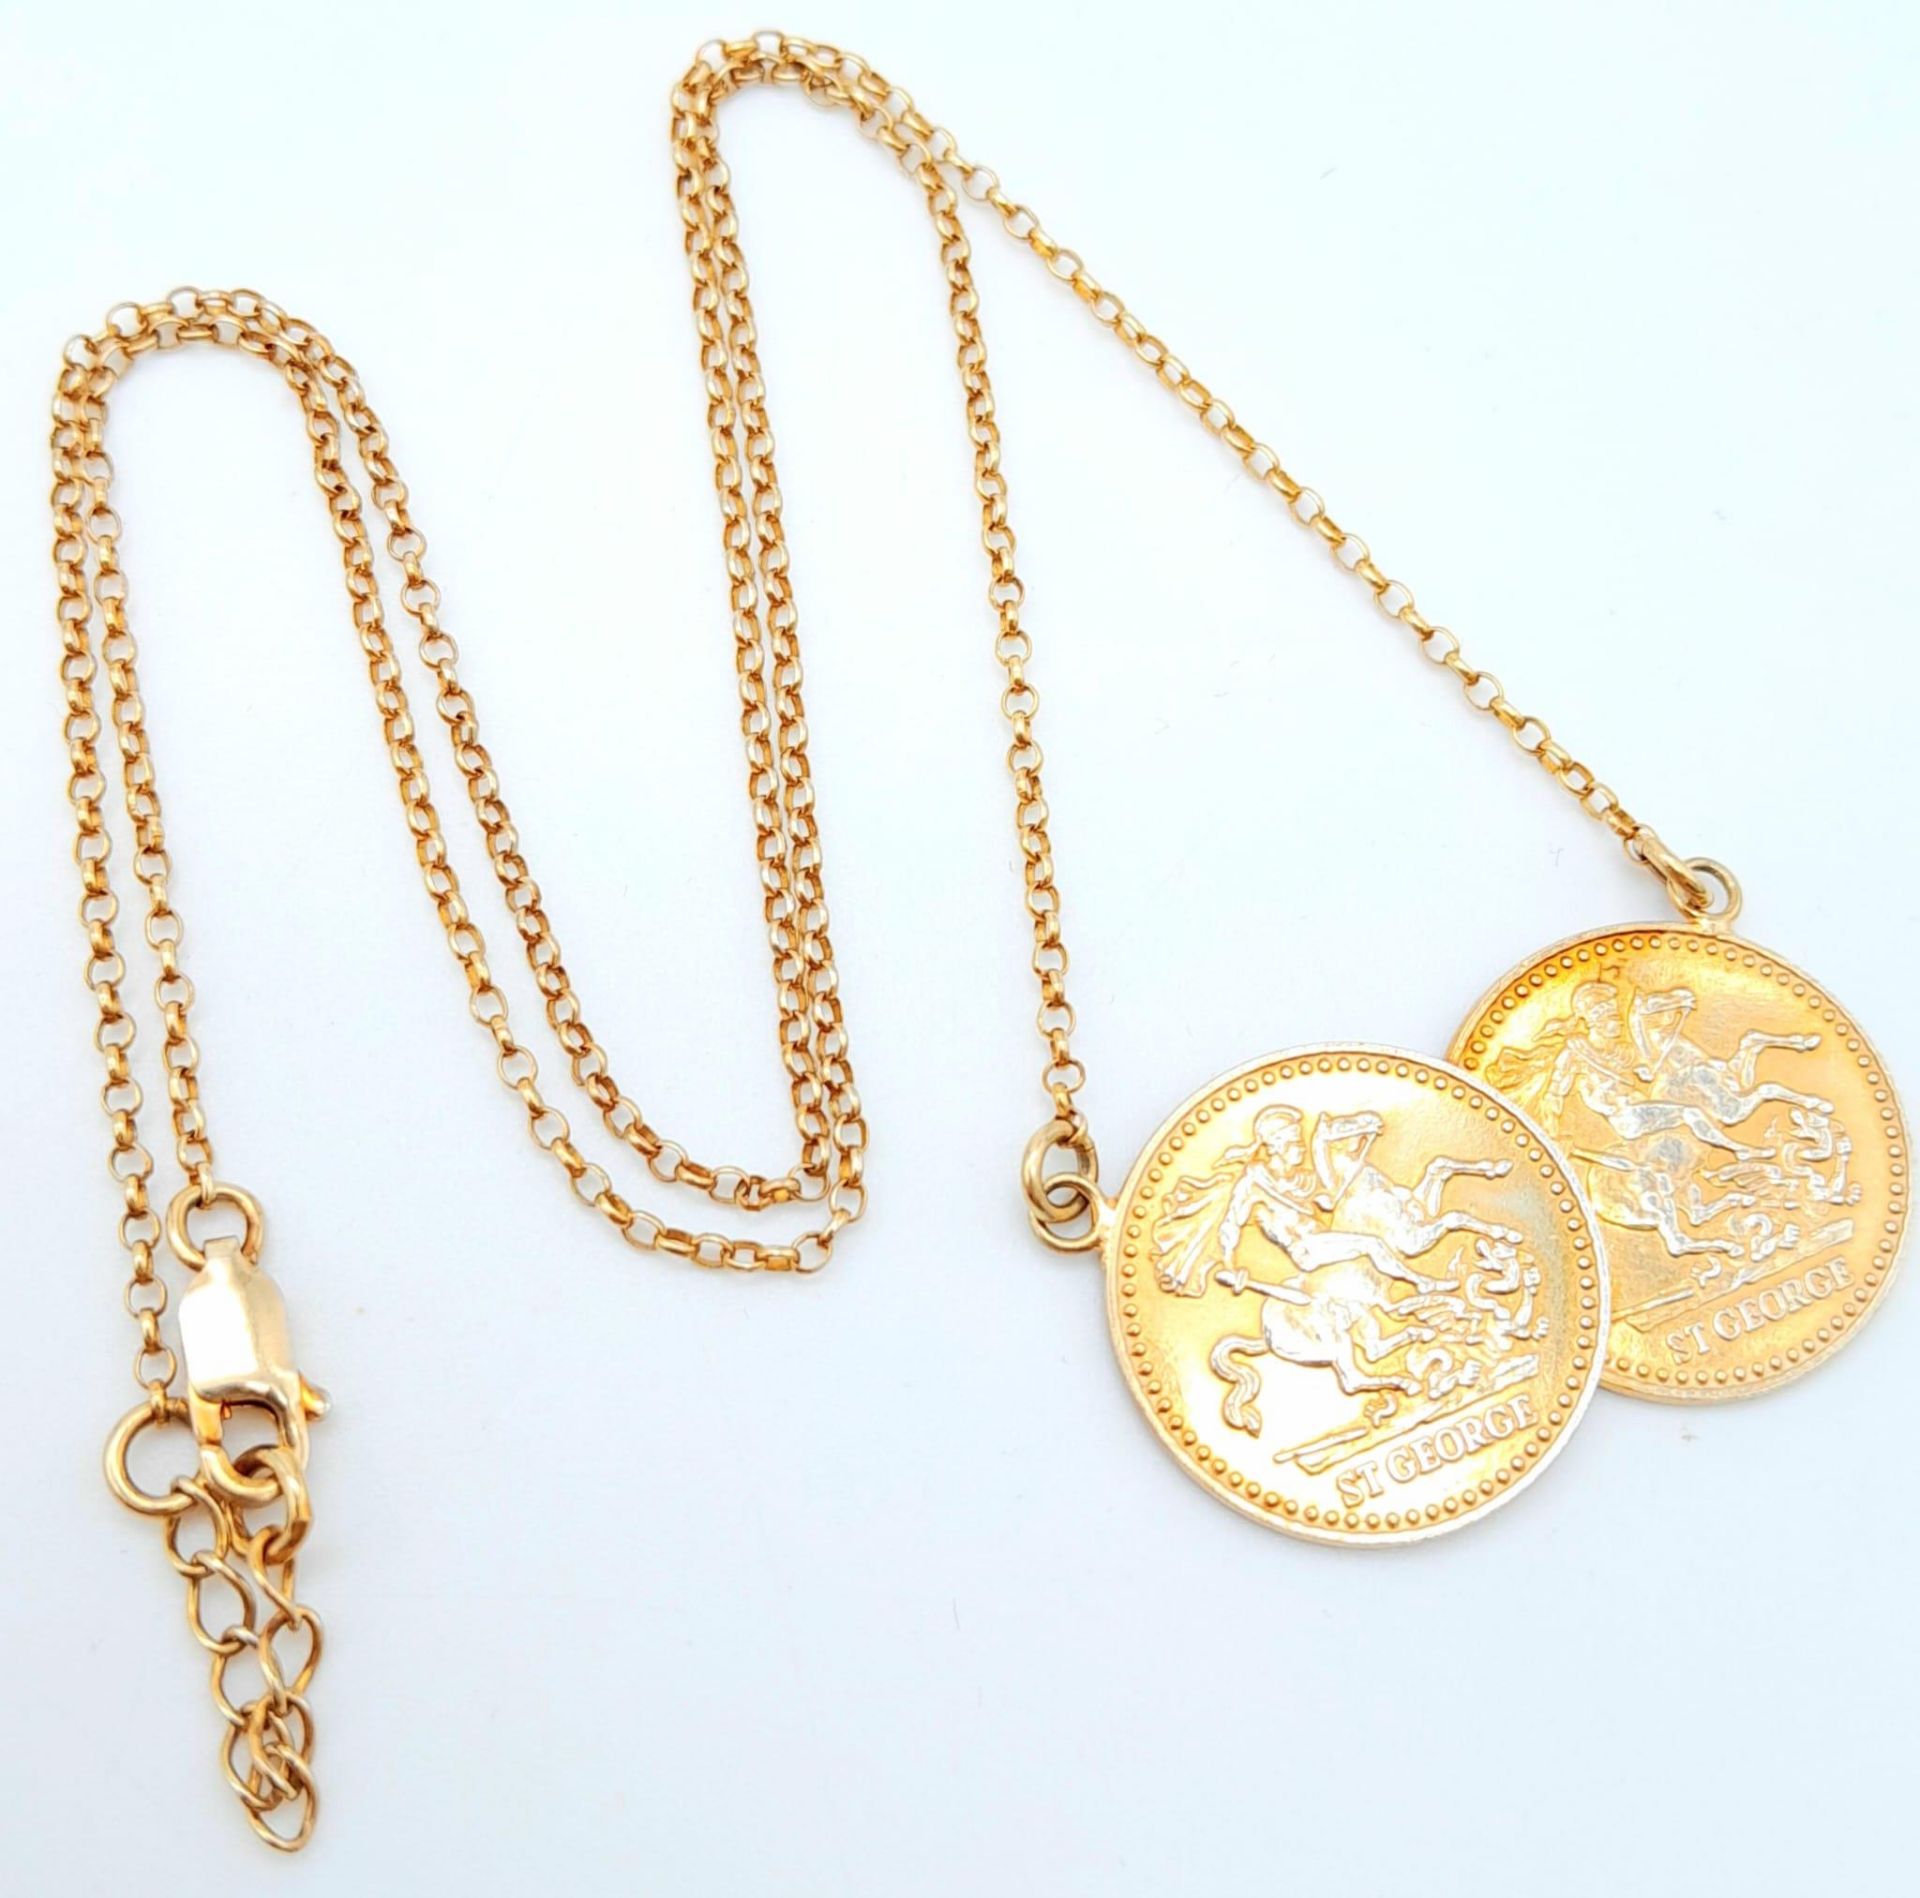 STERLING SILVER WITH GOLD VERMEIL FINISH DOUBLE COIN PENDANT ON NECKLACE, WEIGHT 8.1G, 50CM LONG - Bild 3 aus 6